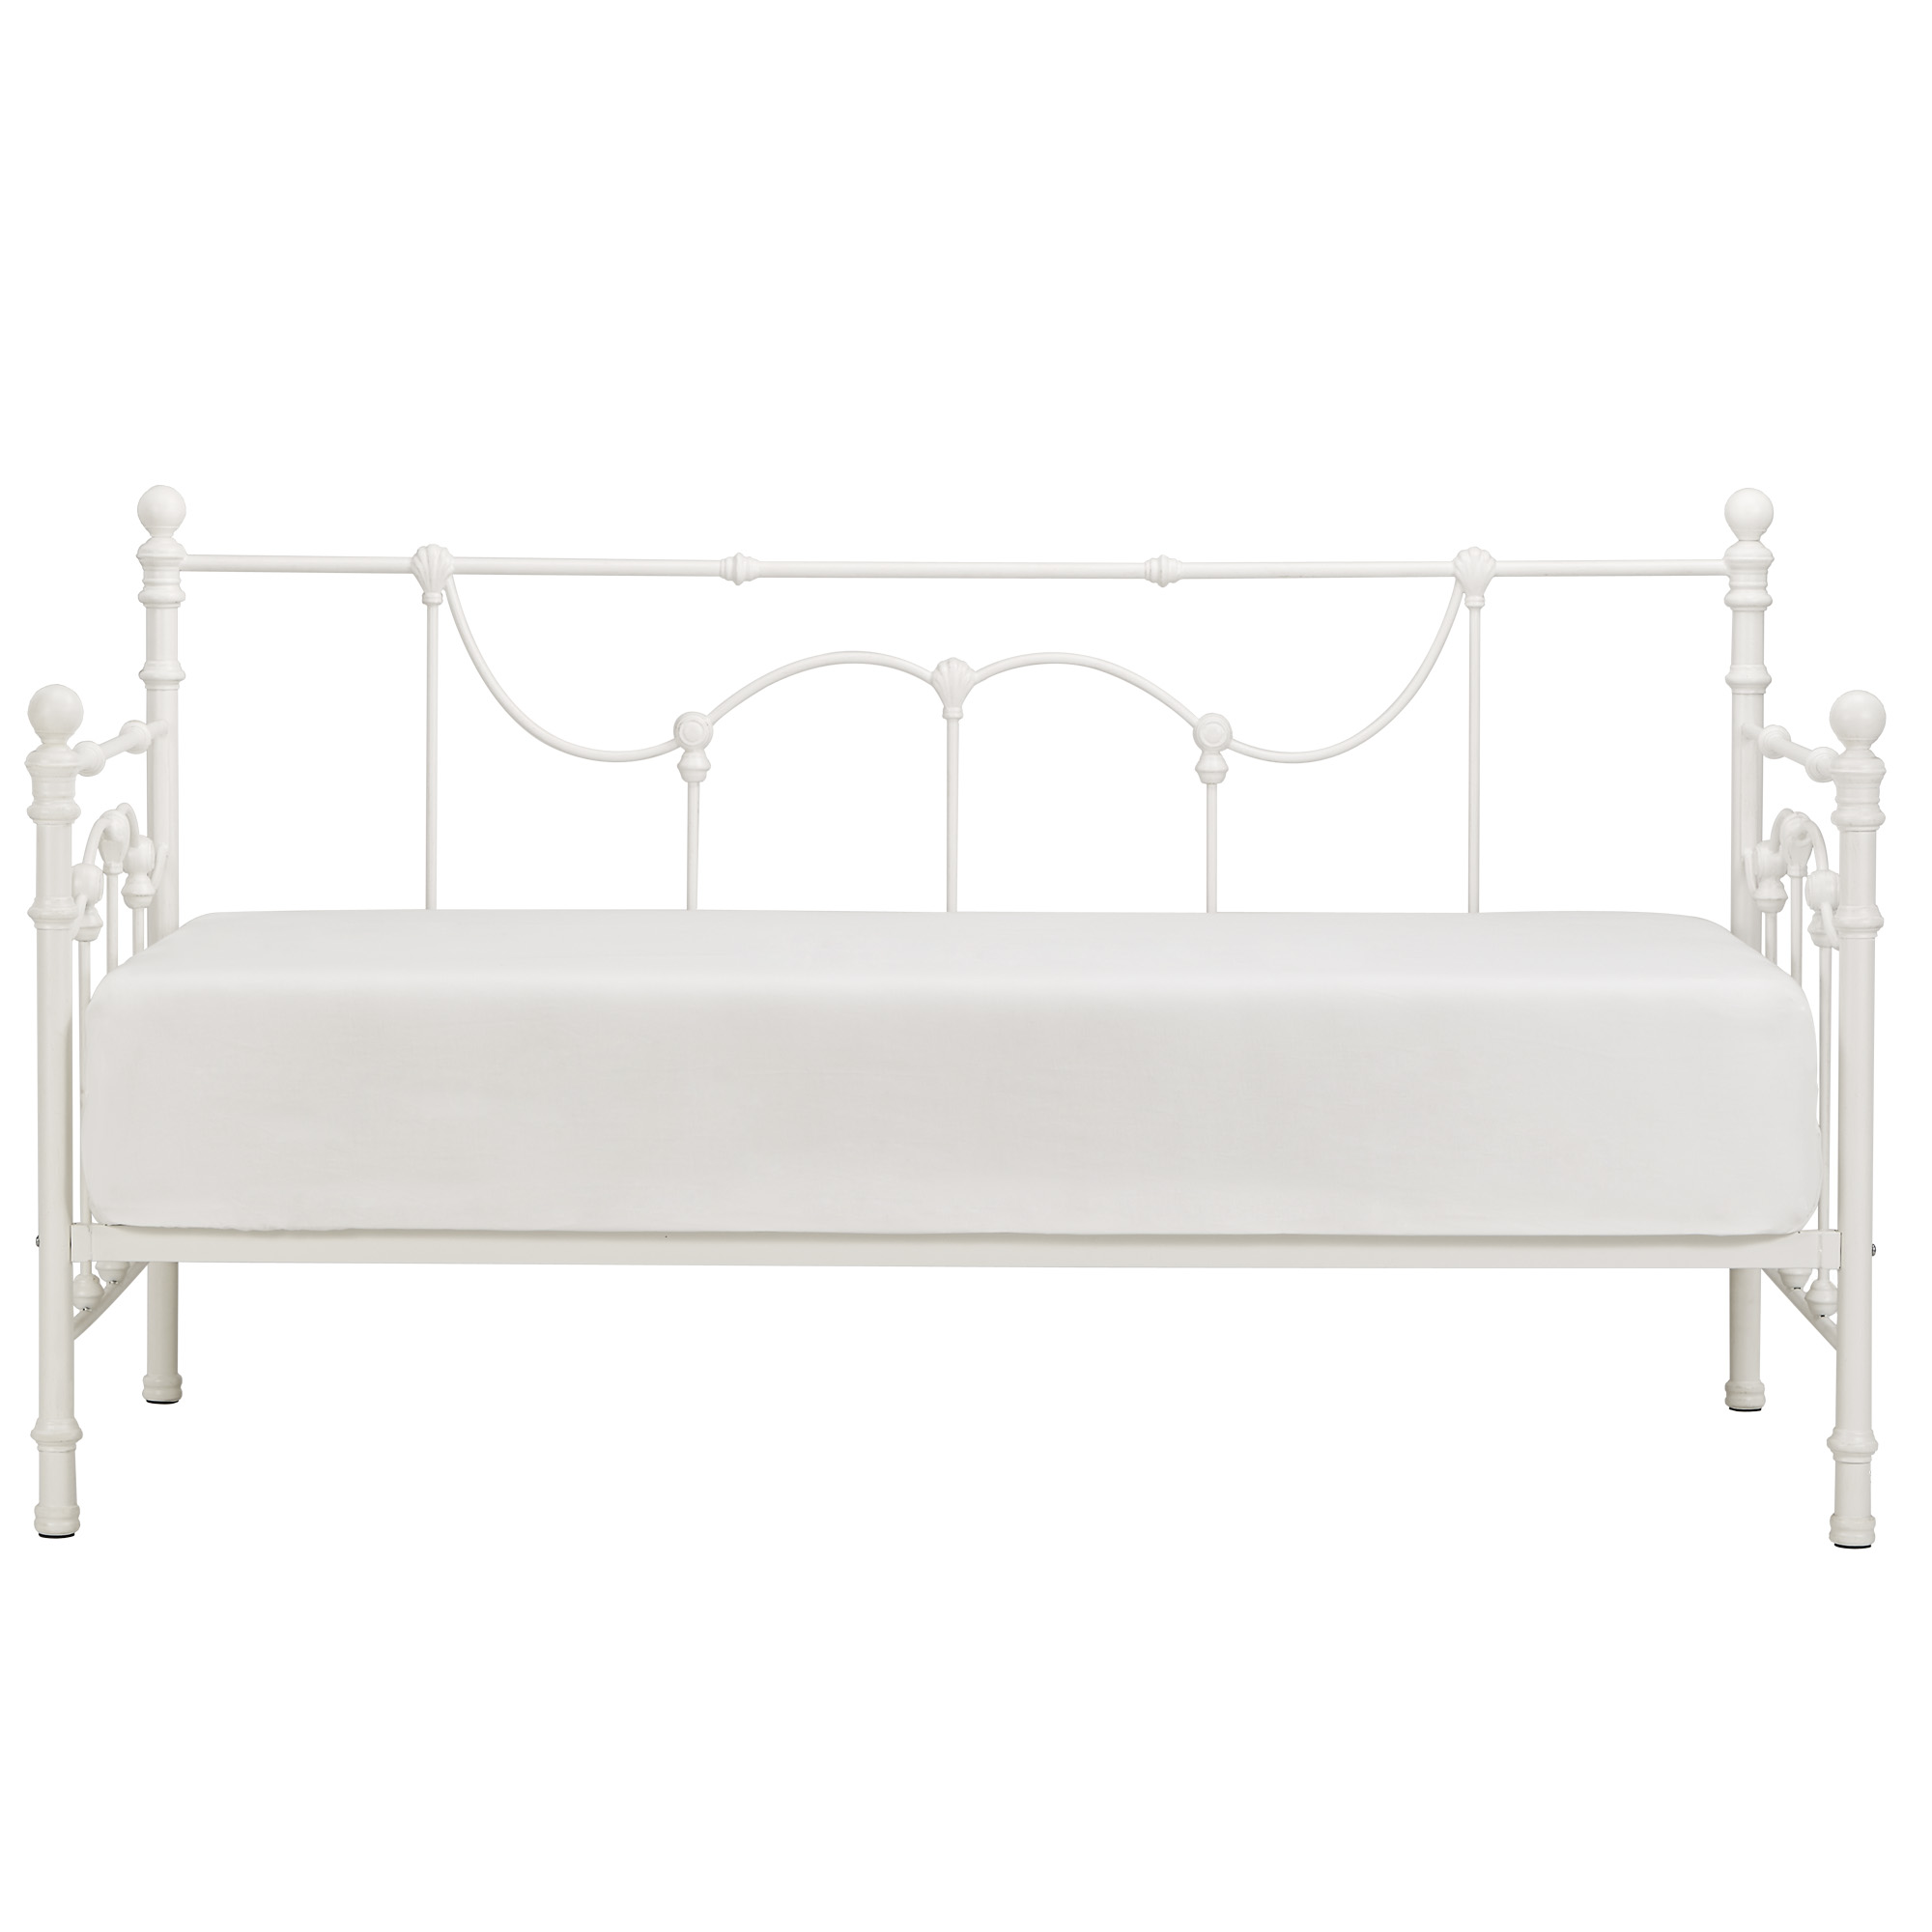 Weston Home Ossett Antique Finish Shell Motif Metal Twin Daybed, Antique White - image 4 of 7